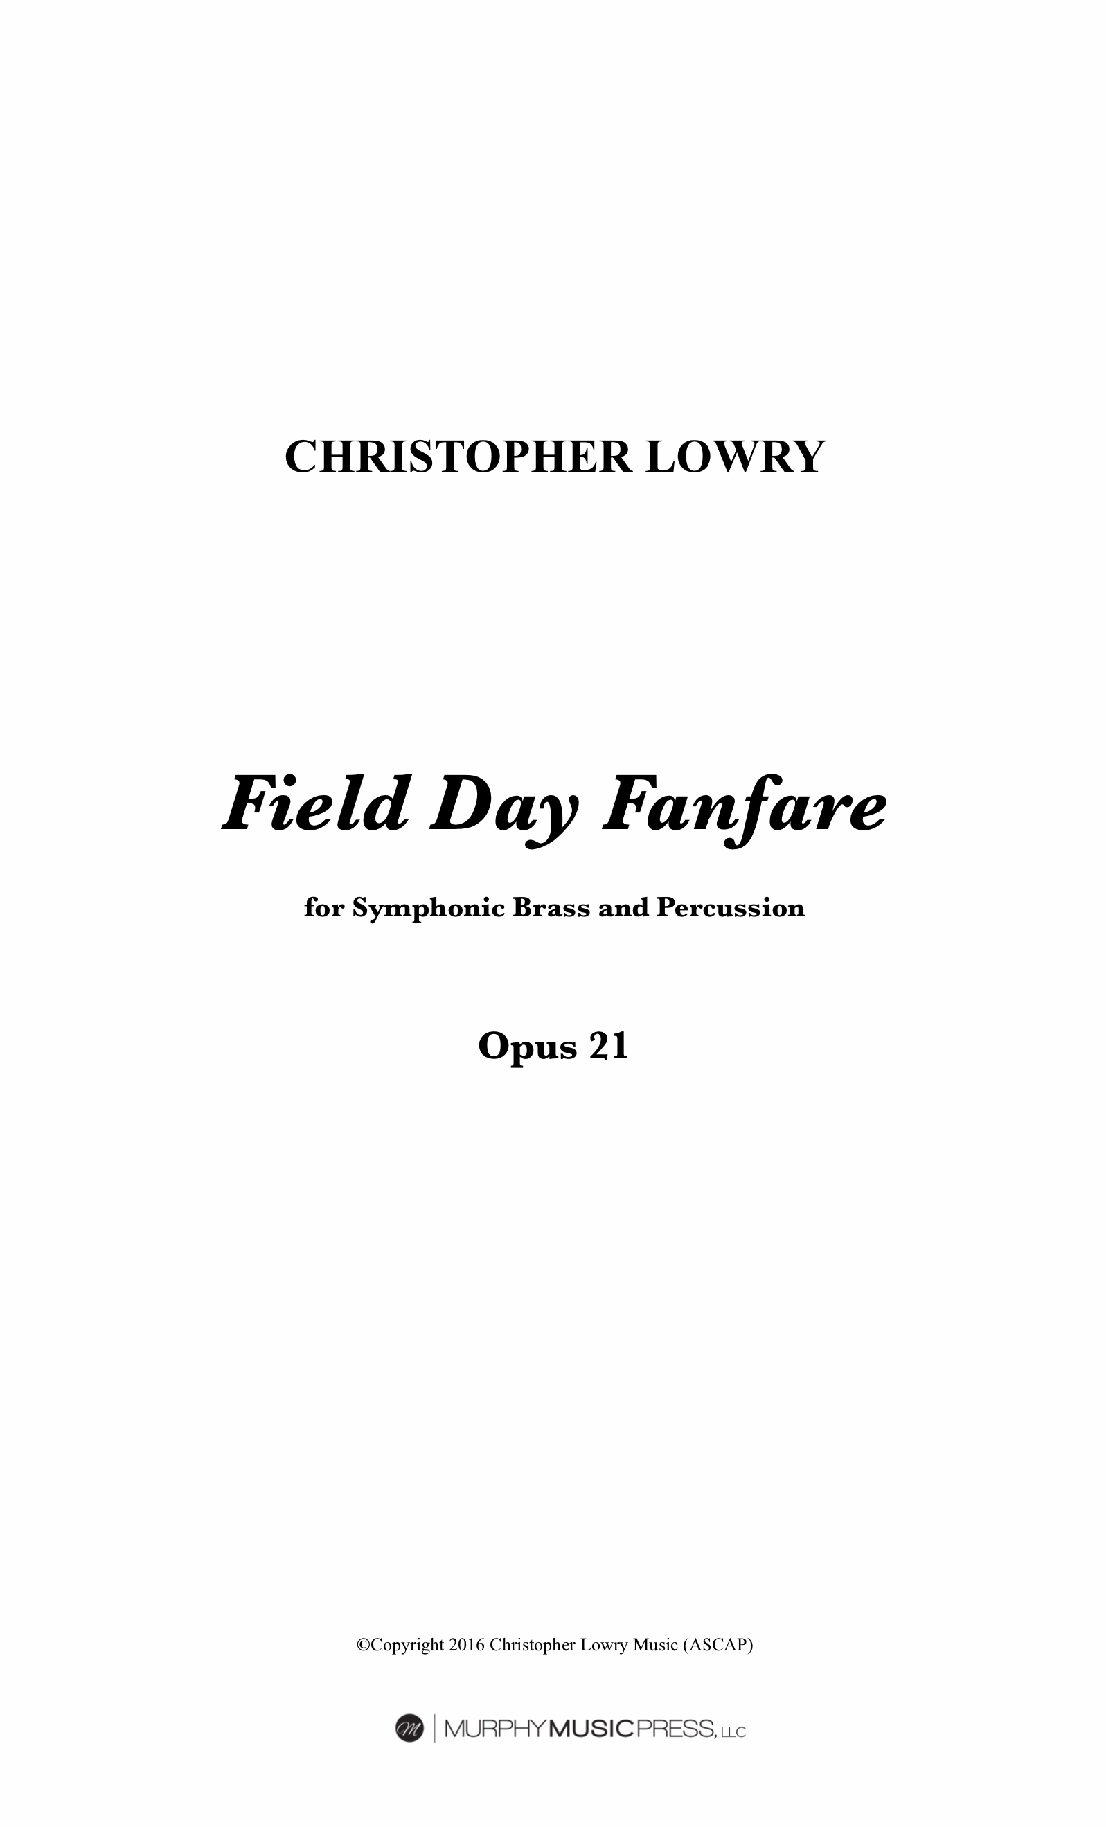 Field Day Fanfare by Christopher Lowry